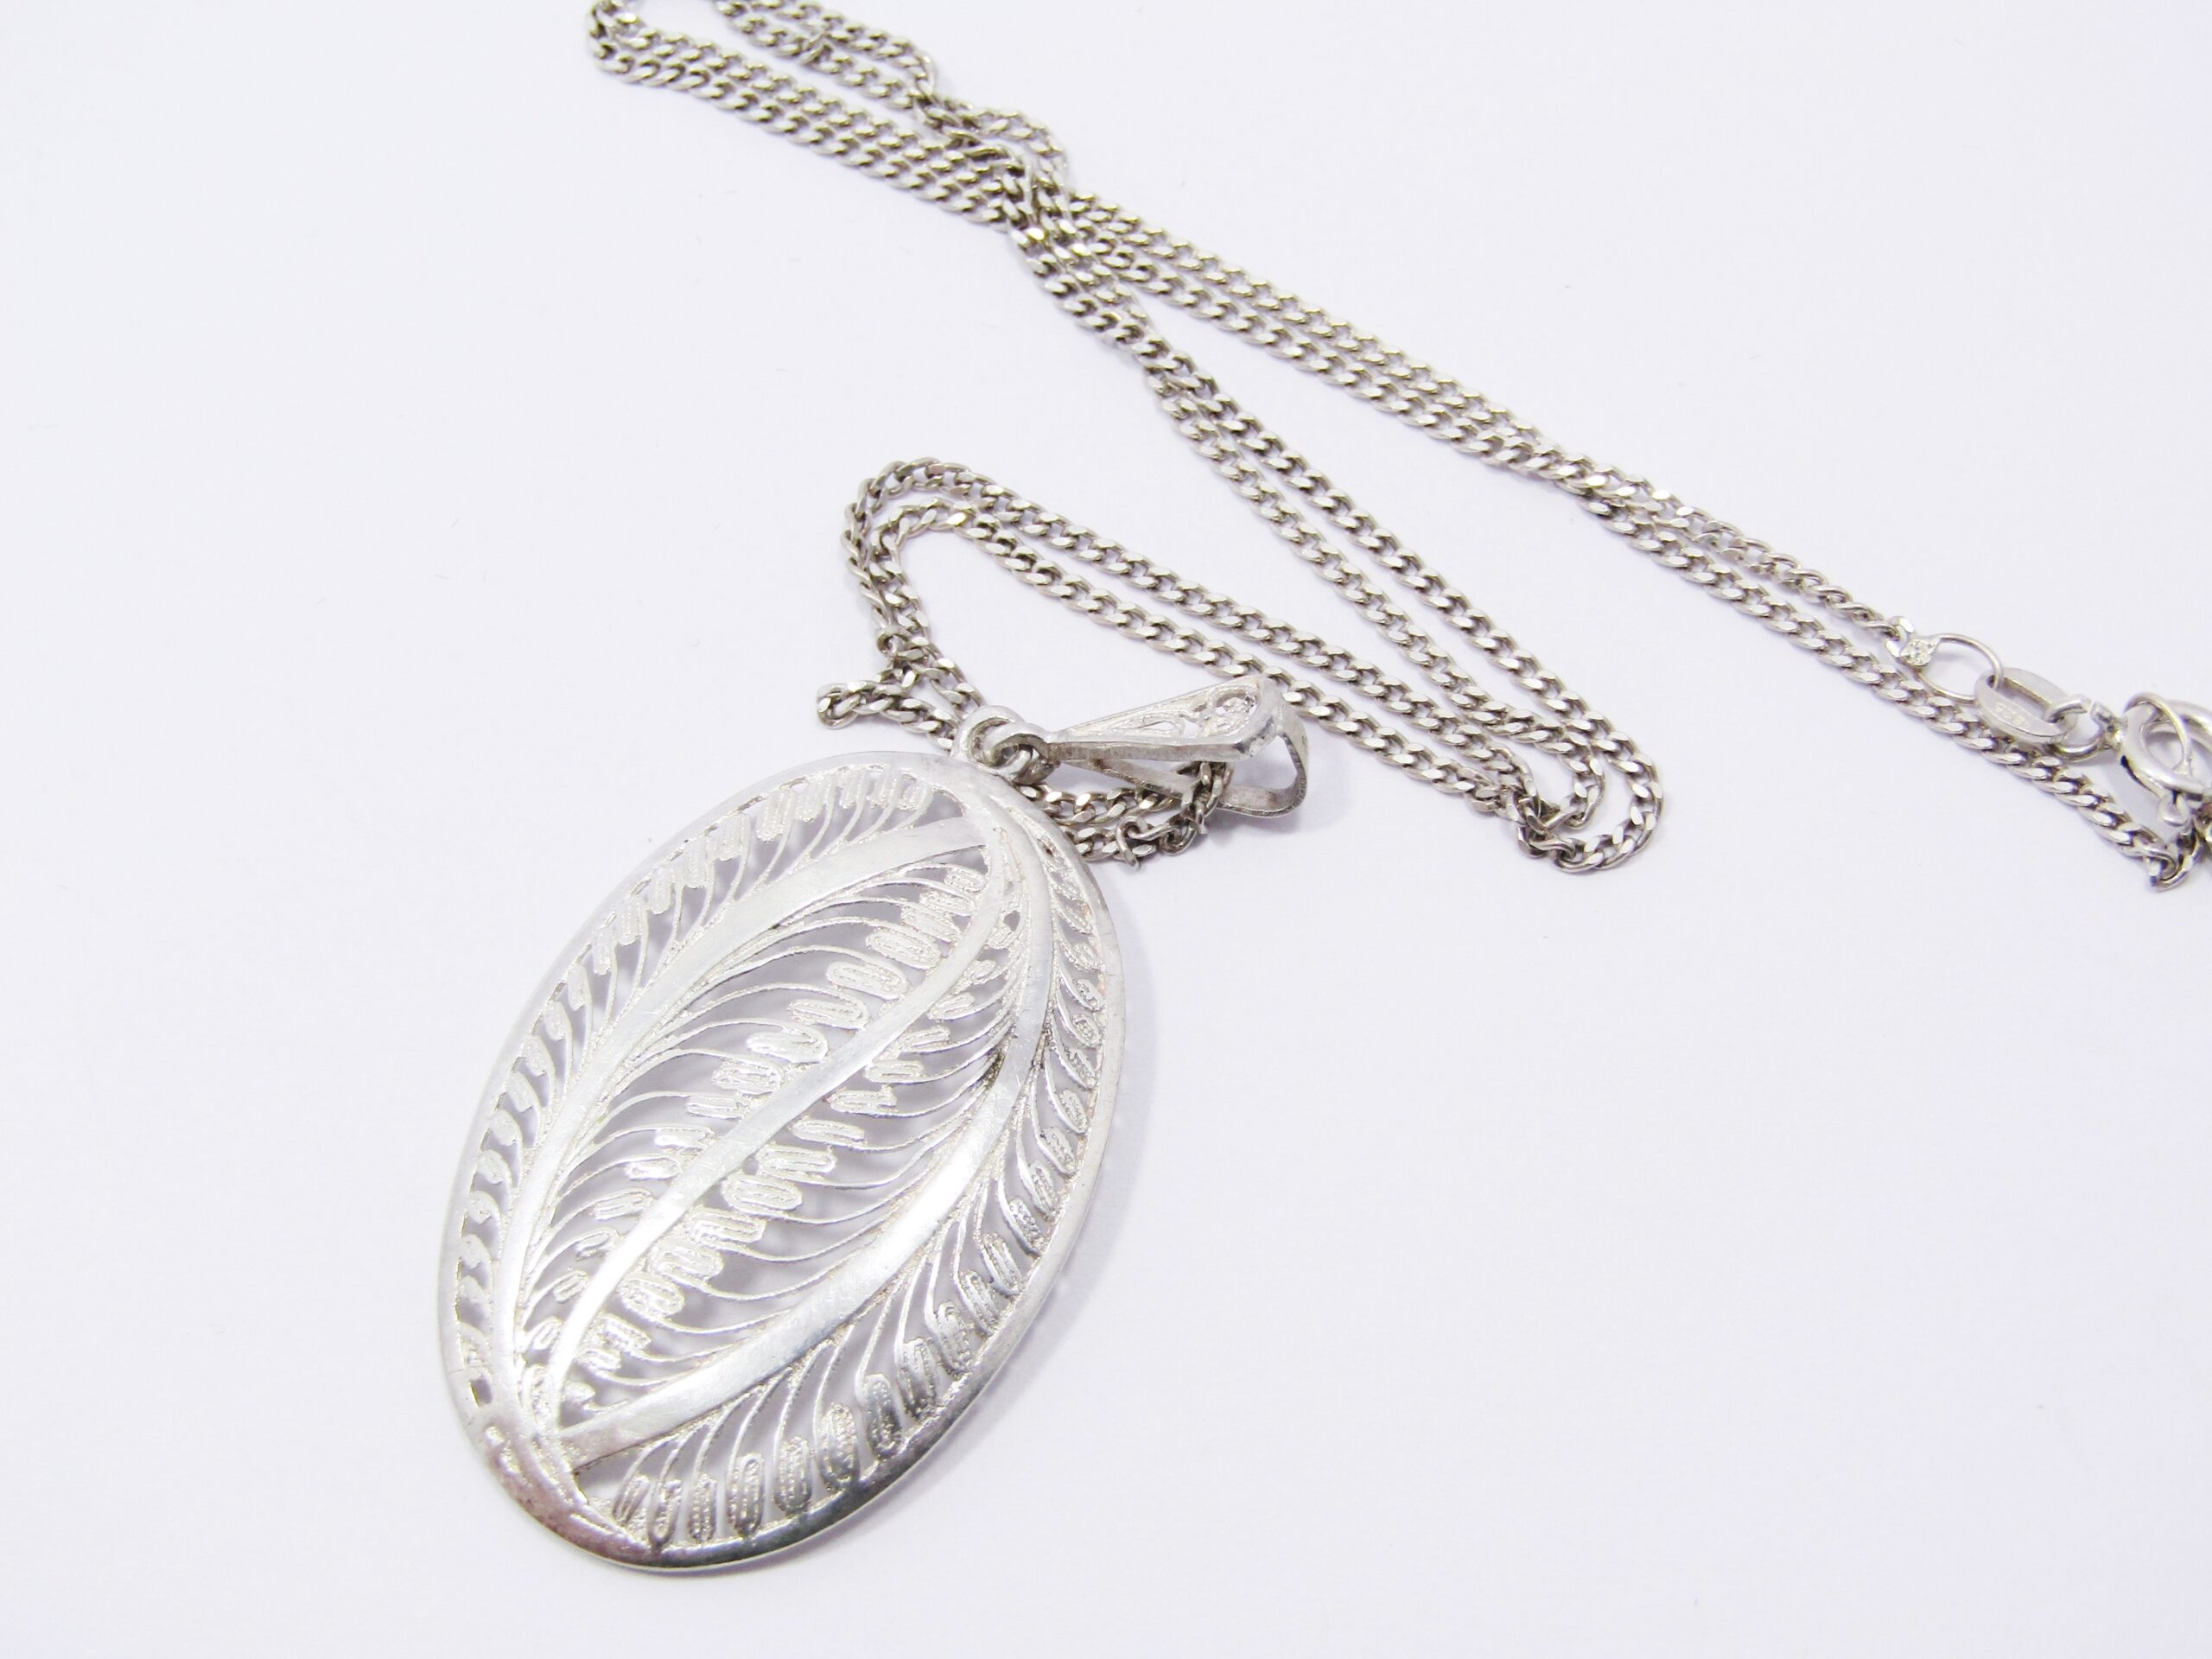 A Beautiful Filigree Design Oval Pendant on Chain in Sterling Silver.